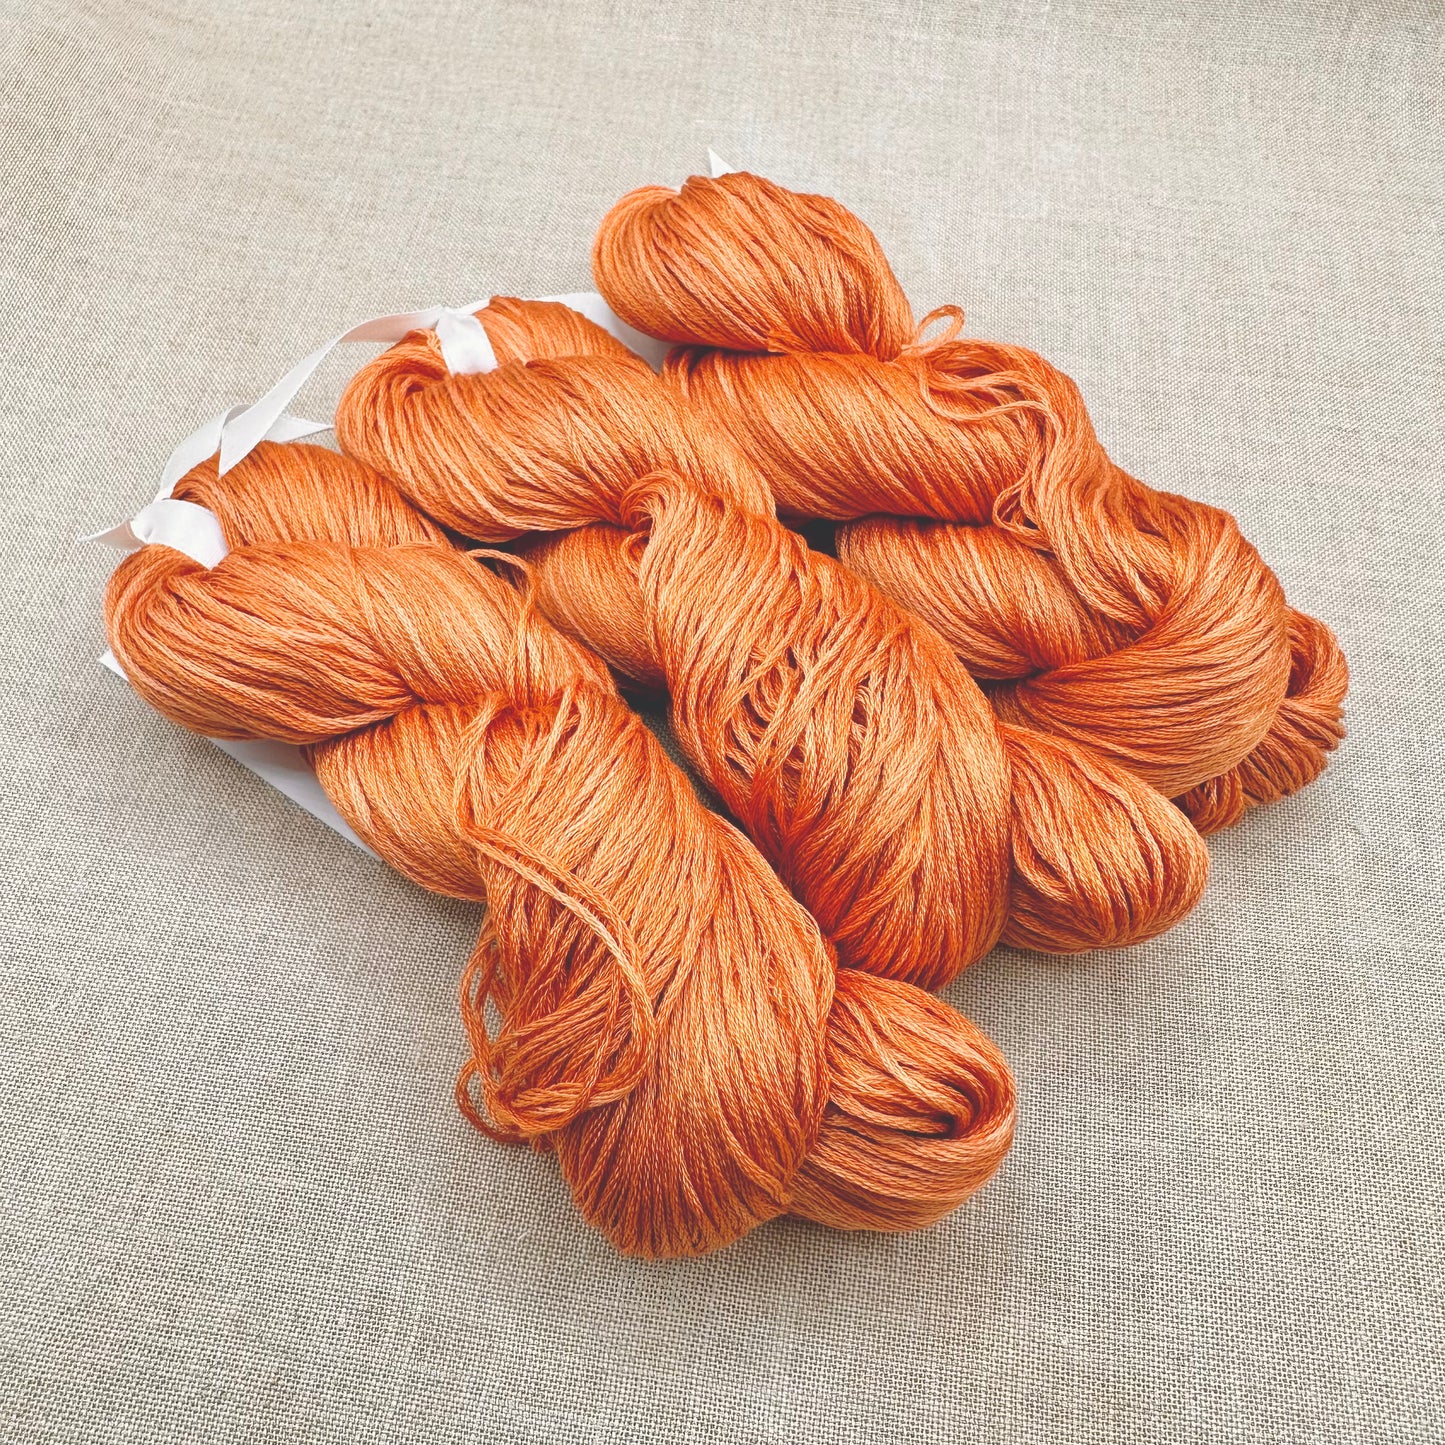 Roxy Floss Collection MINI HANK (approx. 192 yds) - Rhymes with Orange